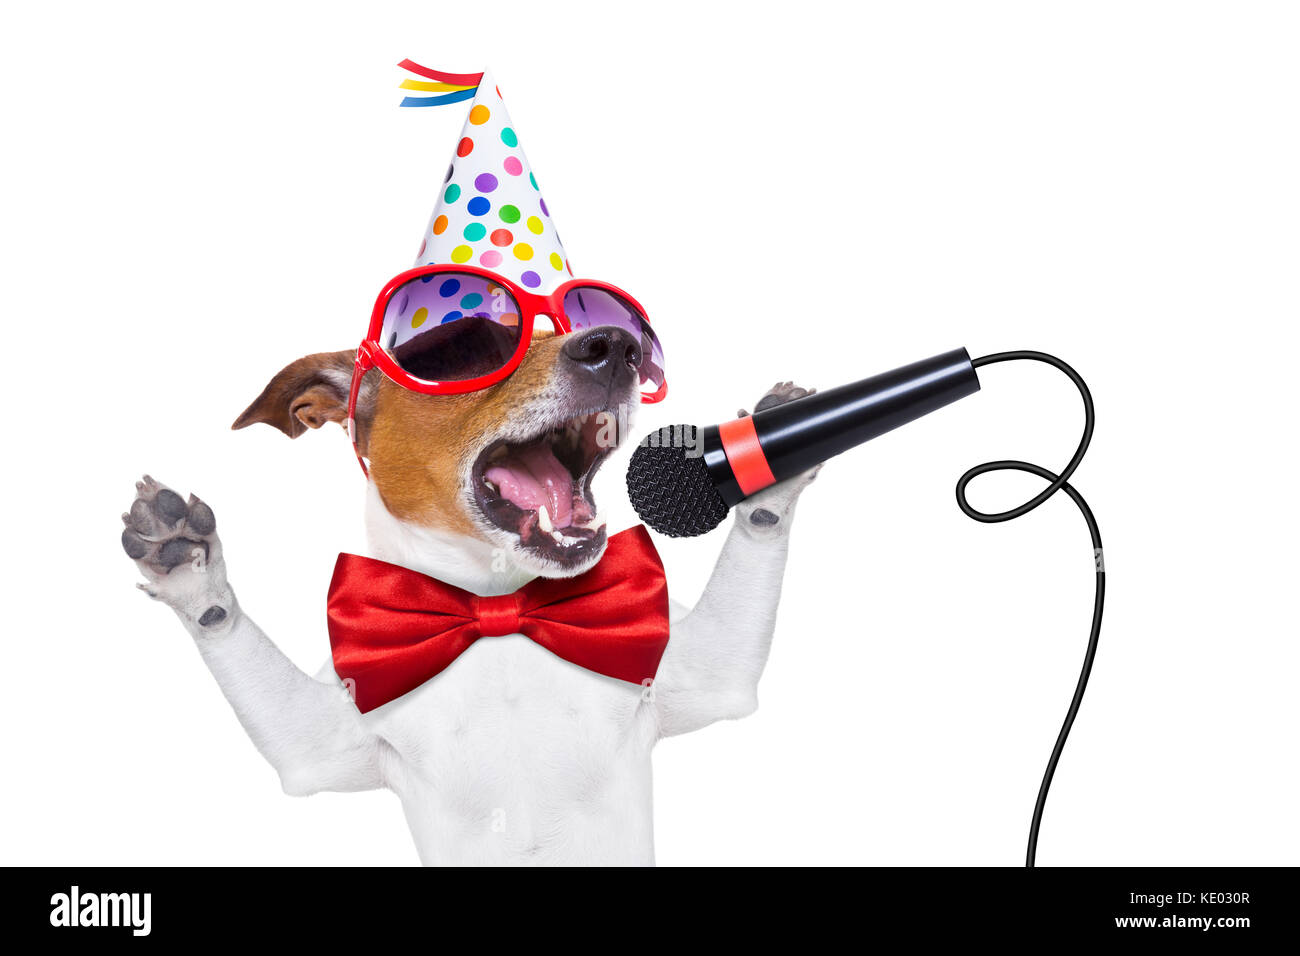 Jack Russell Dog As A Surprise Singing Birthday Song Like Karaoke With Microphone Wearing Red Tie And Party Hat Isolated On White Background Stock Photo Alamy